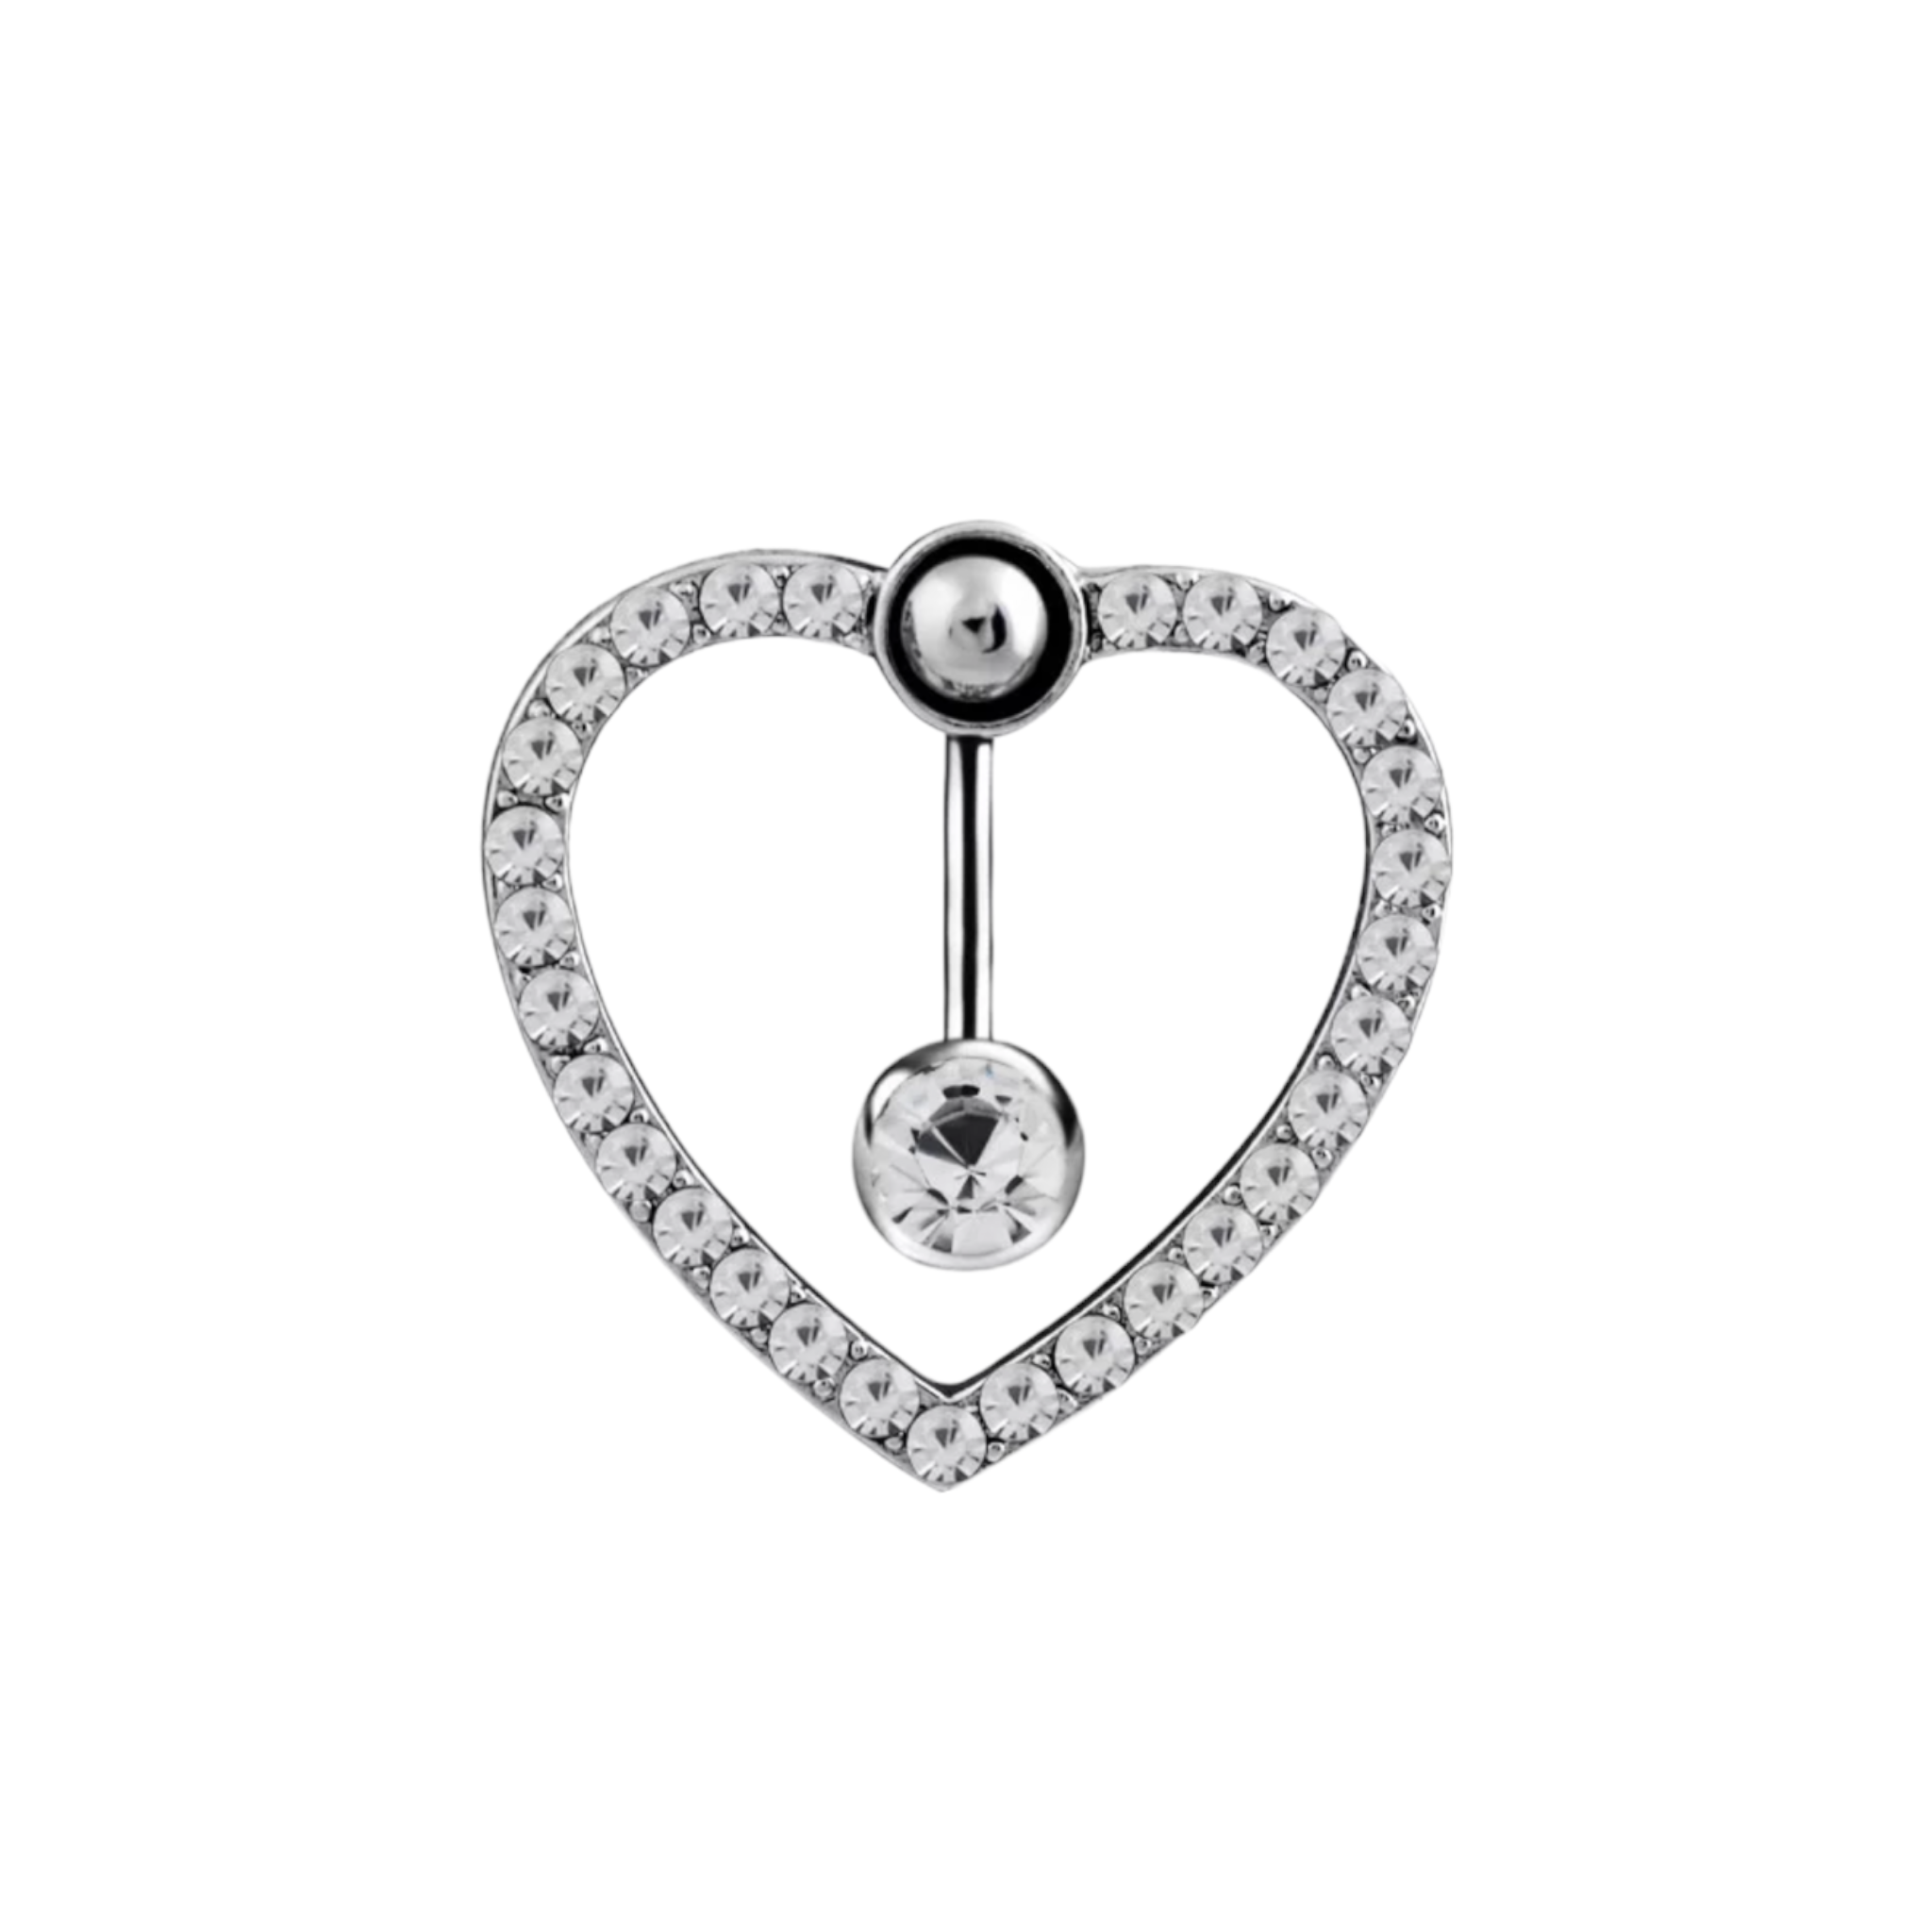 Real Corazon Belly Bar